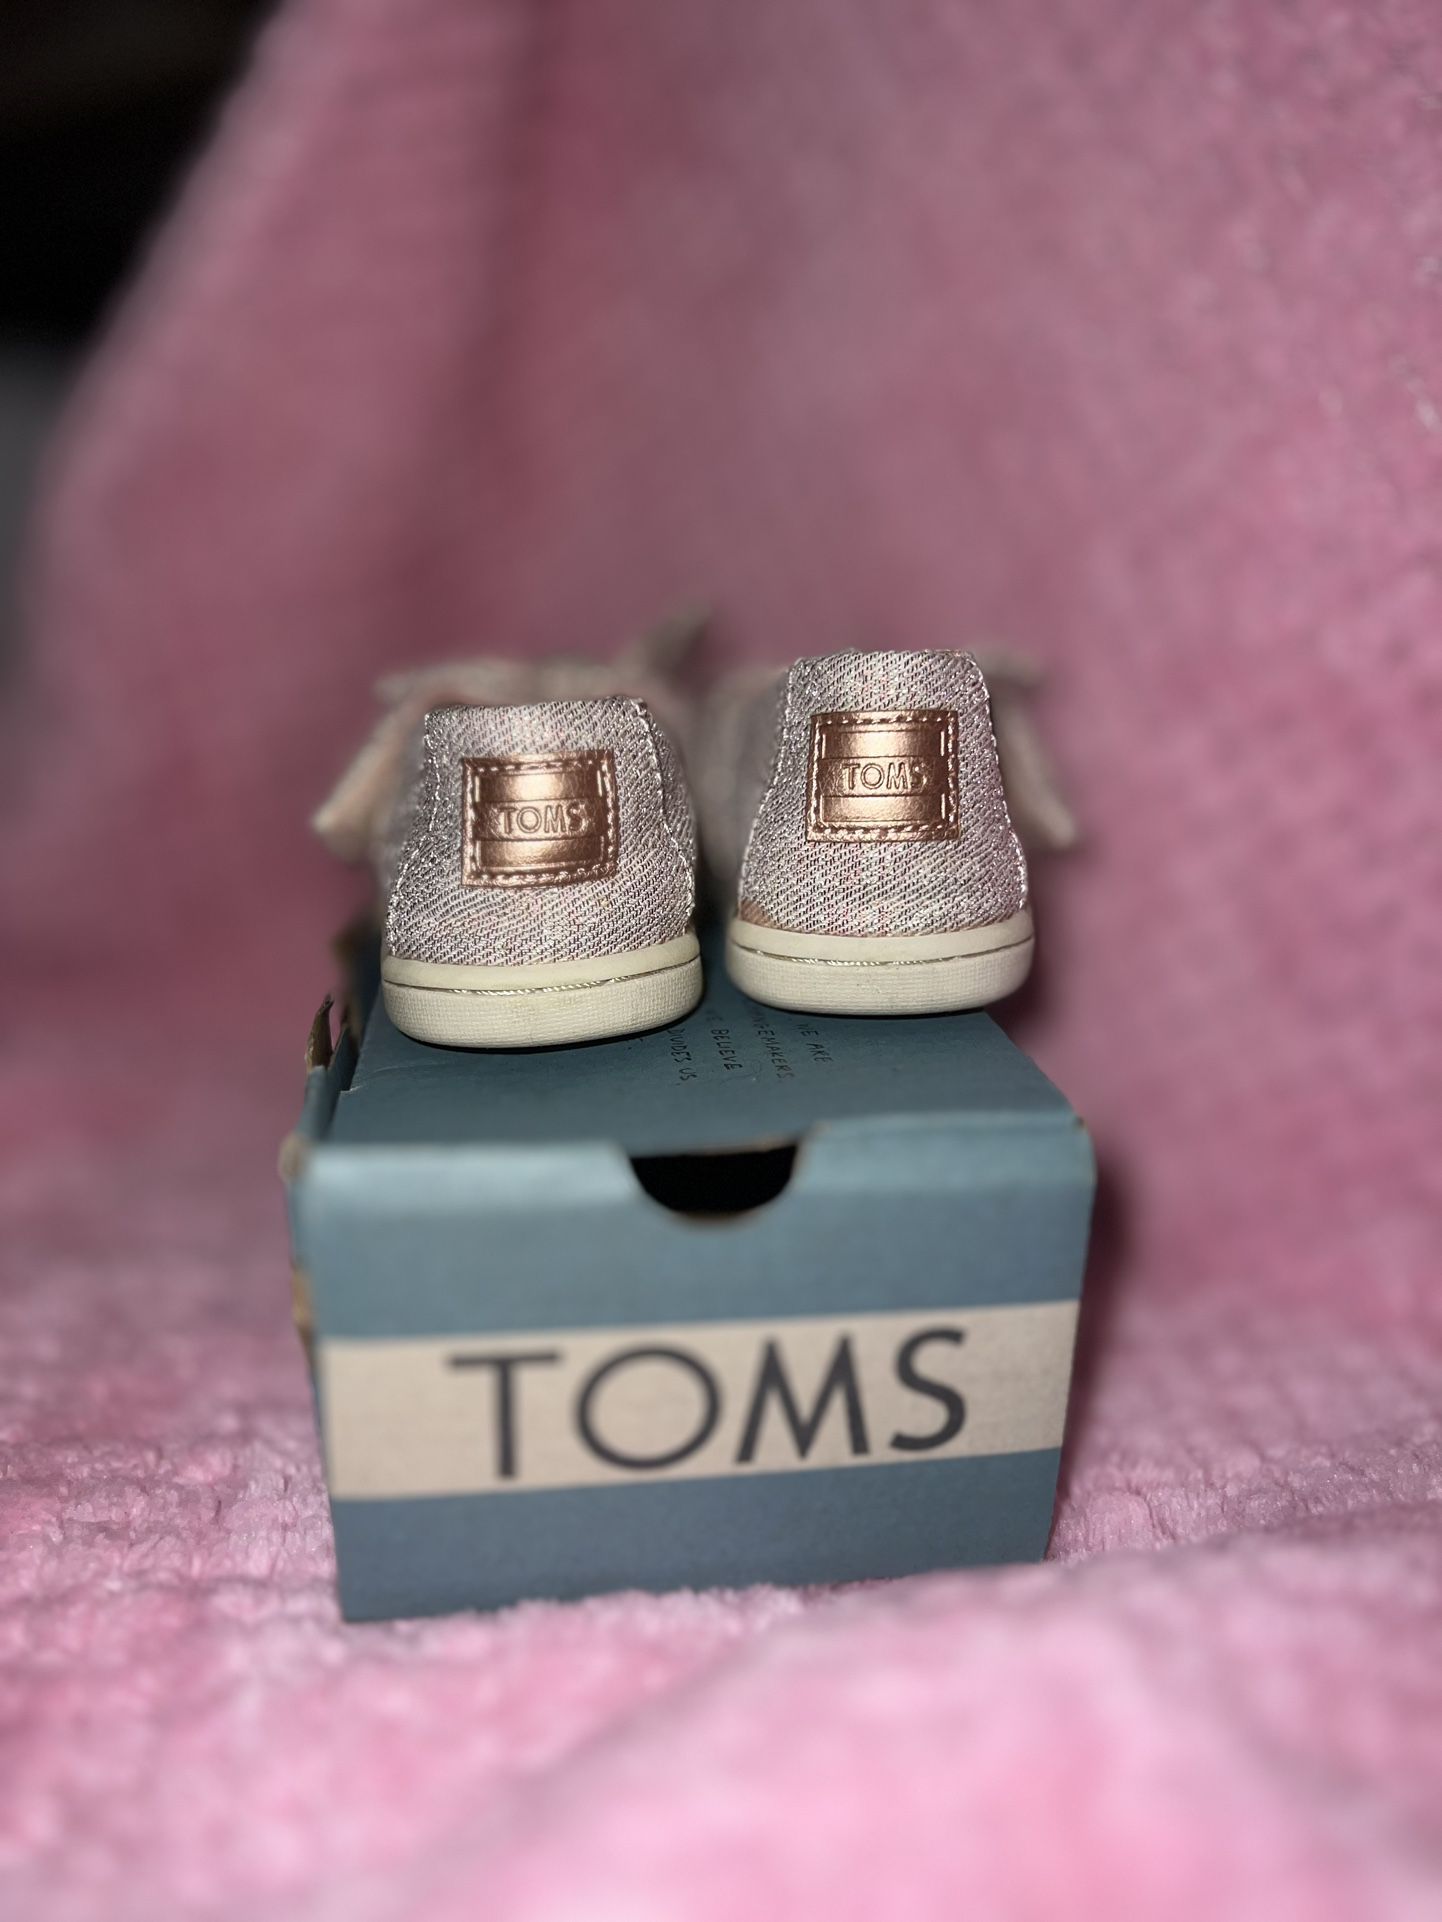 Toms Classic Rose Cloud Twill Glimmer Tiny size 4.